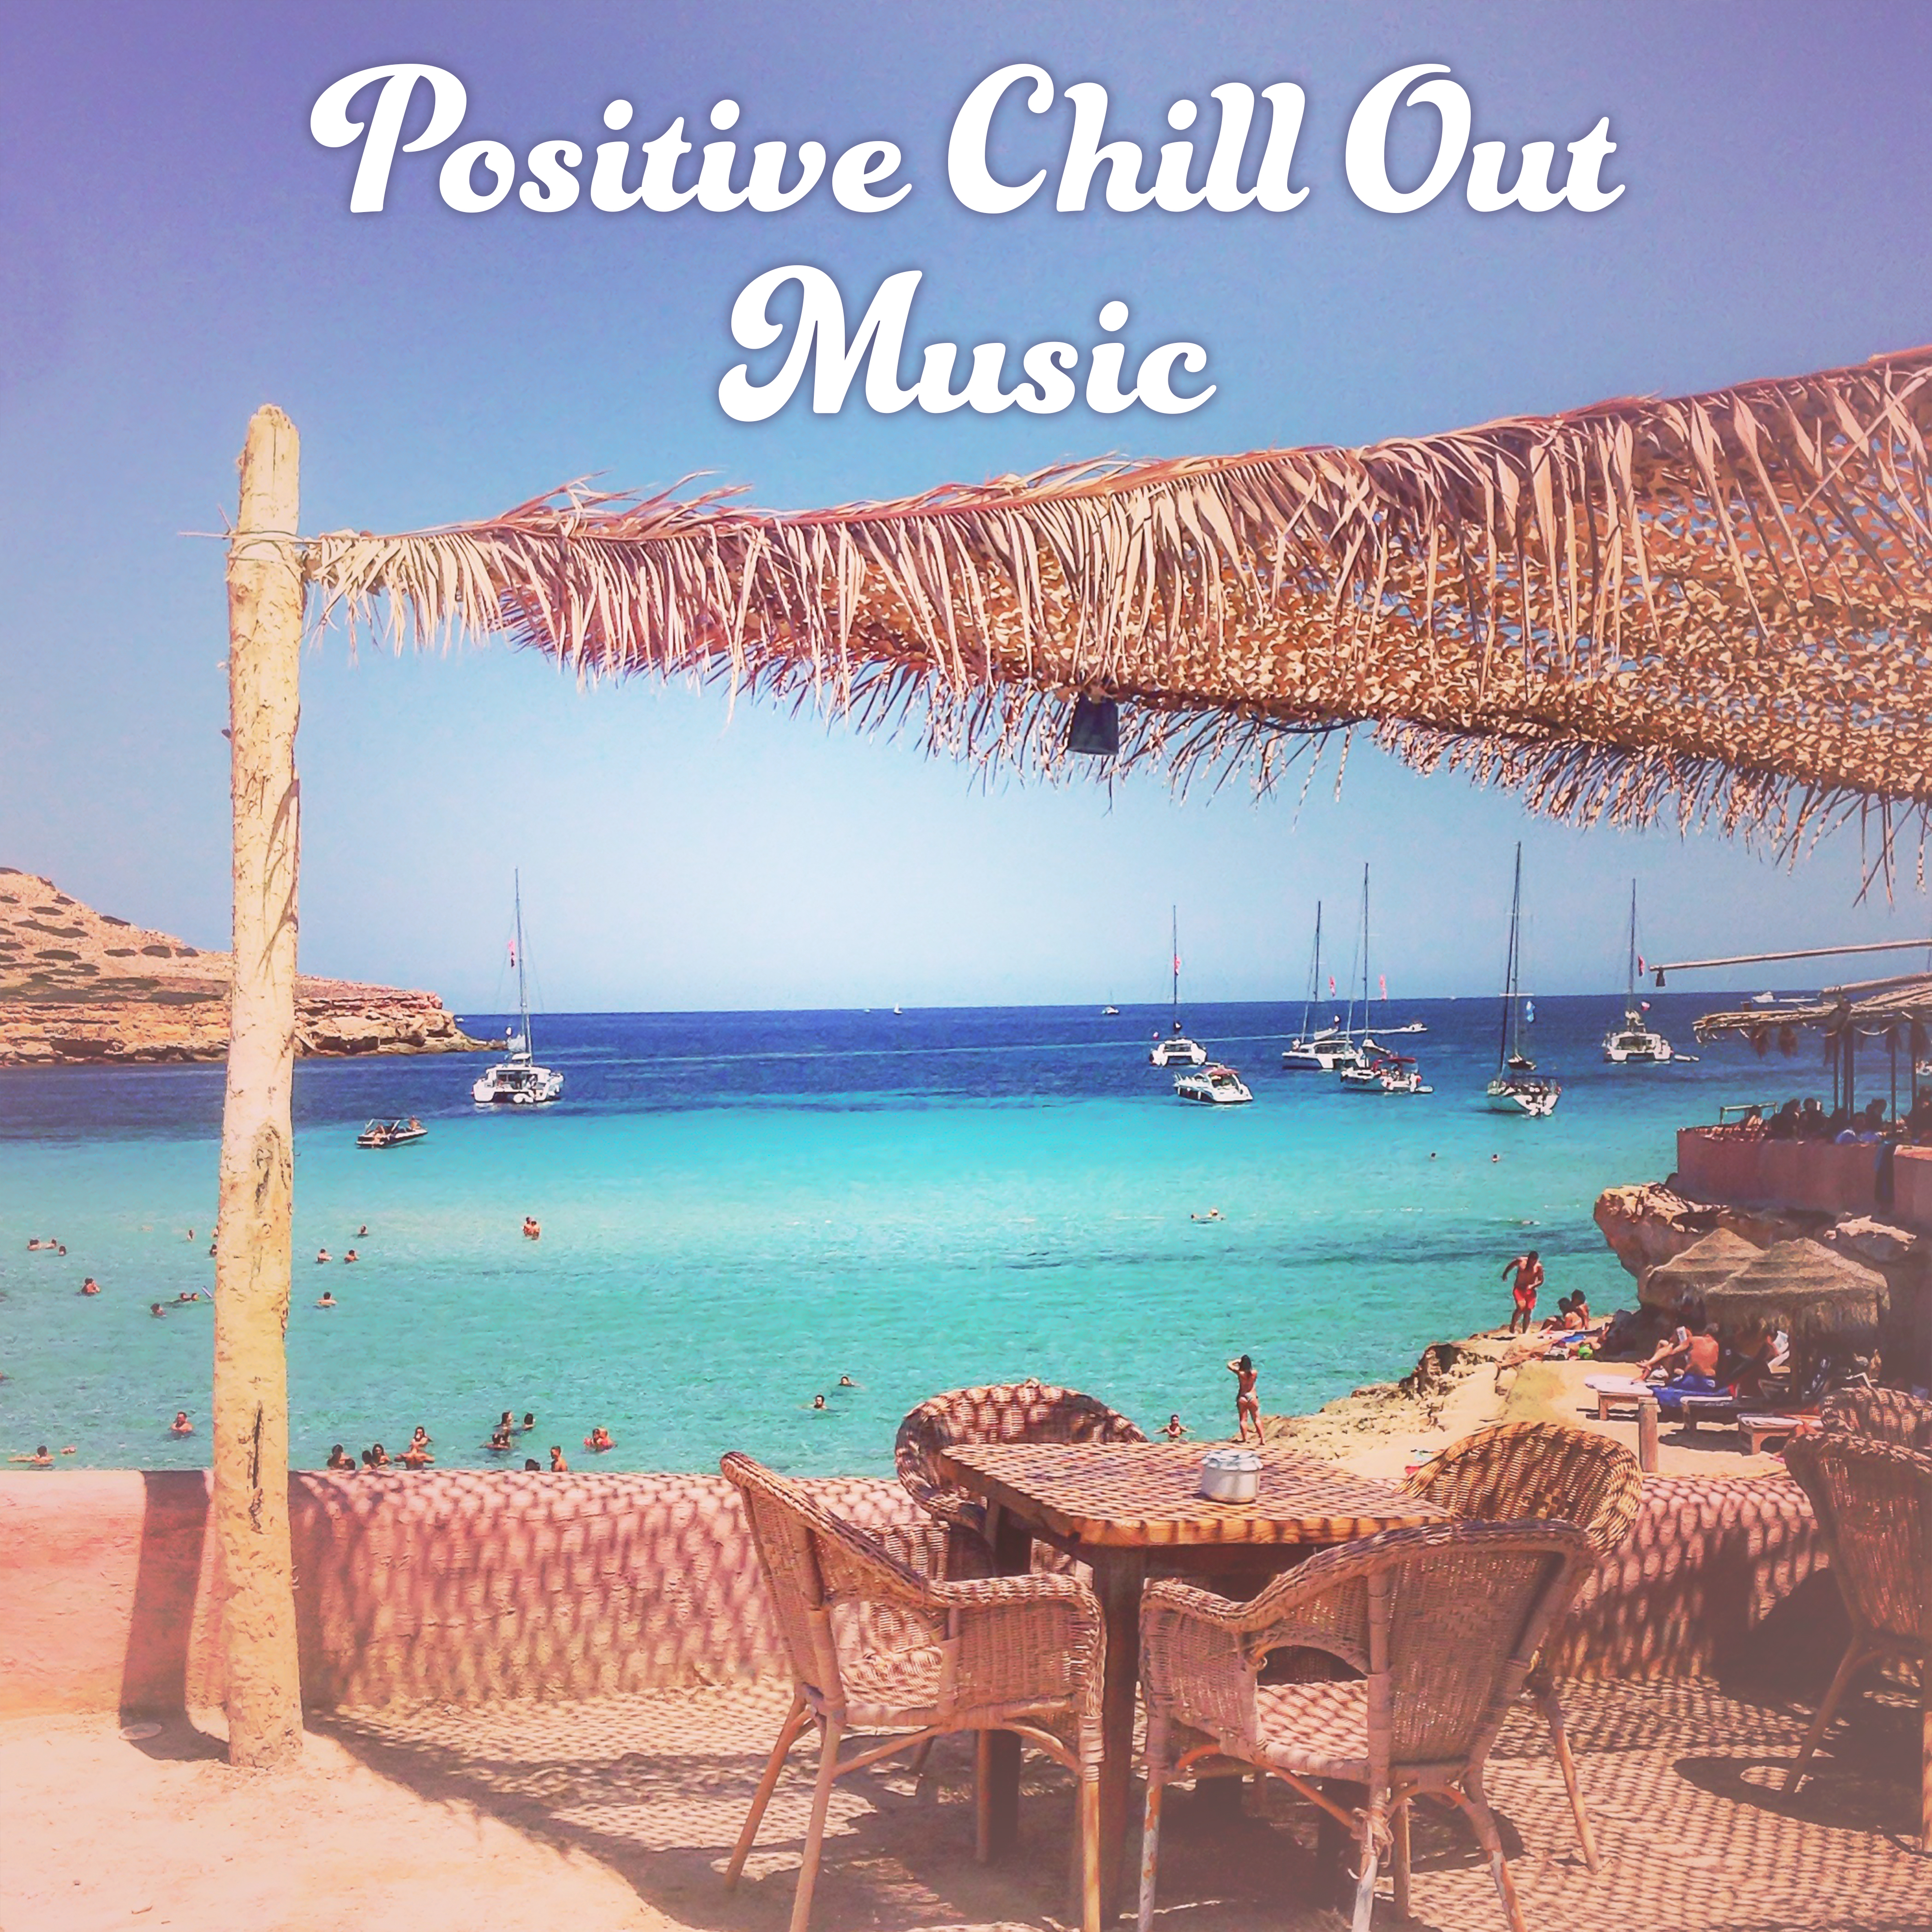 Positive Chill Out Music – Relaxing Chill Out Music, Rest with Calm Music, Holiday in Tropics